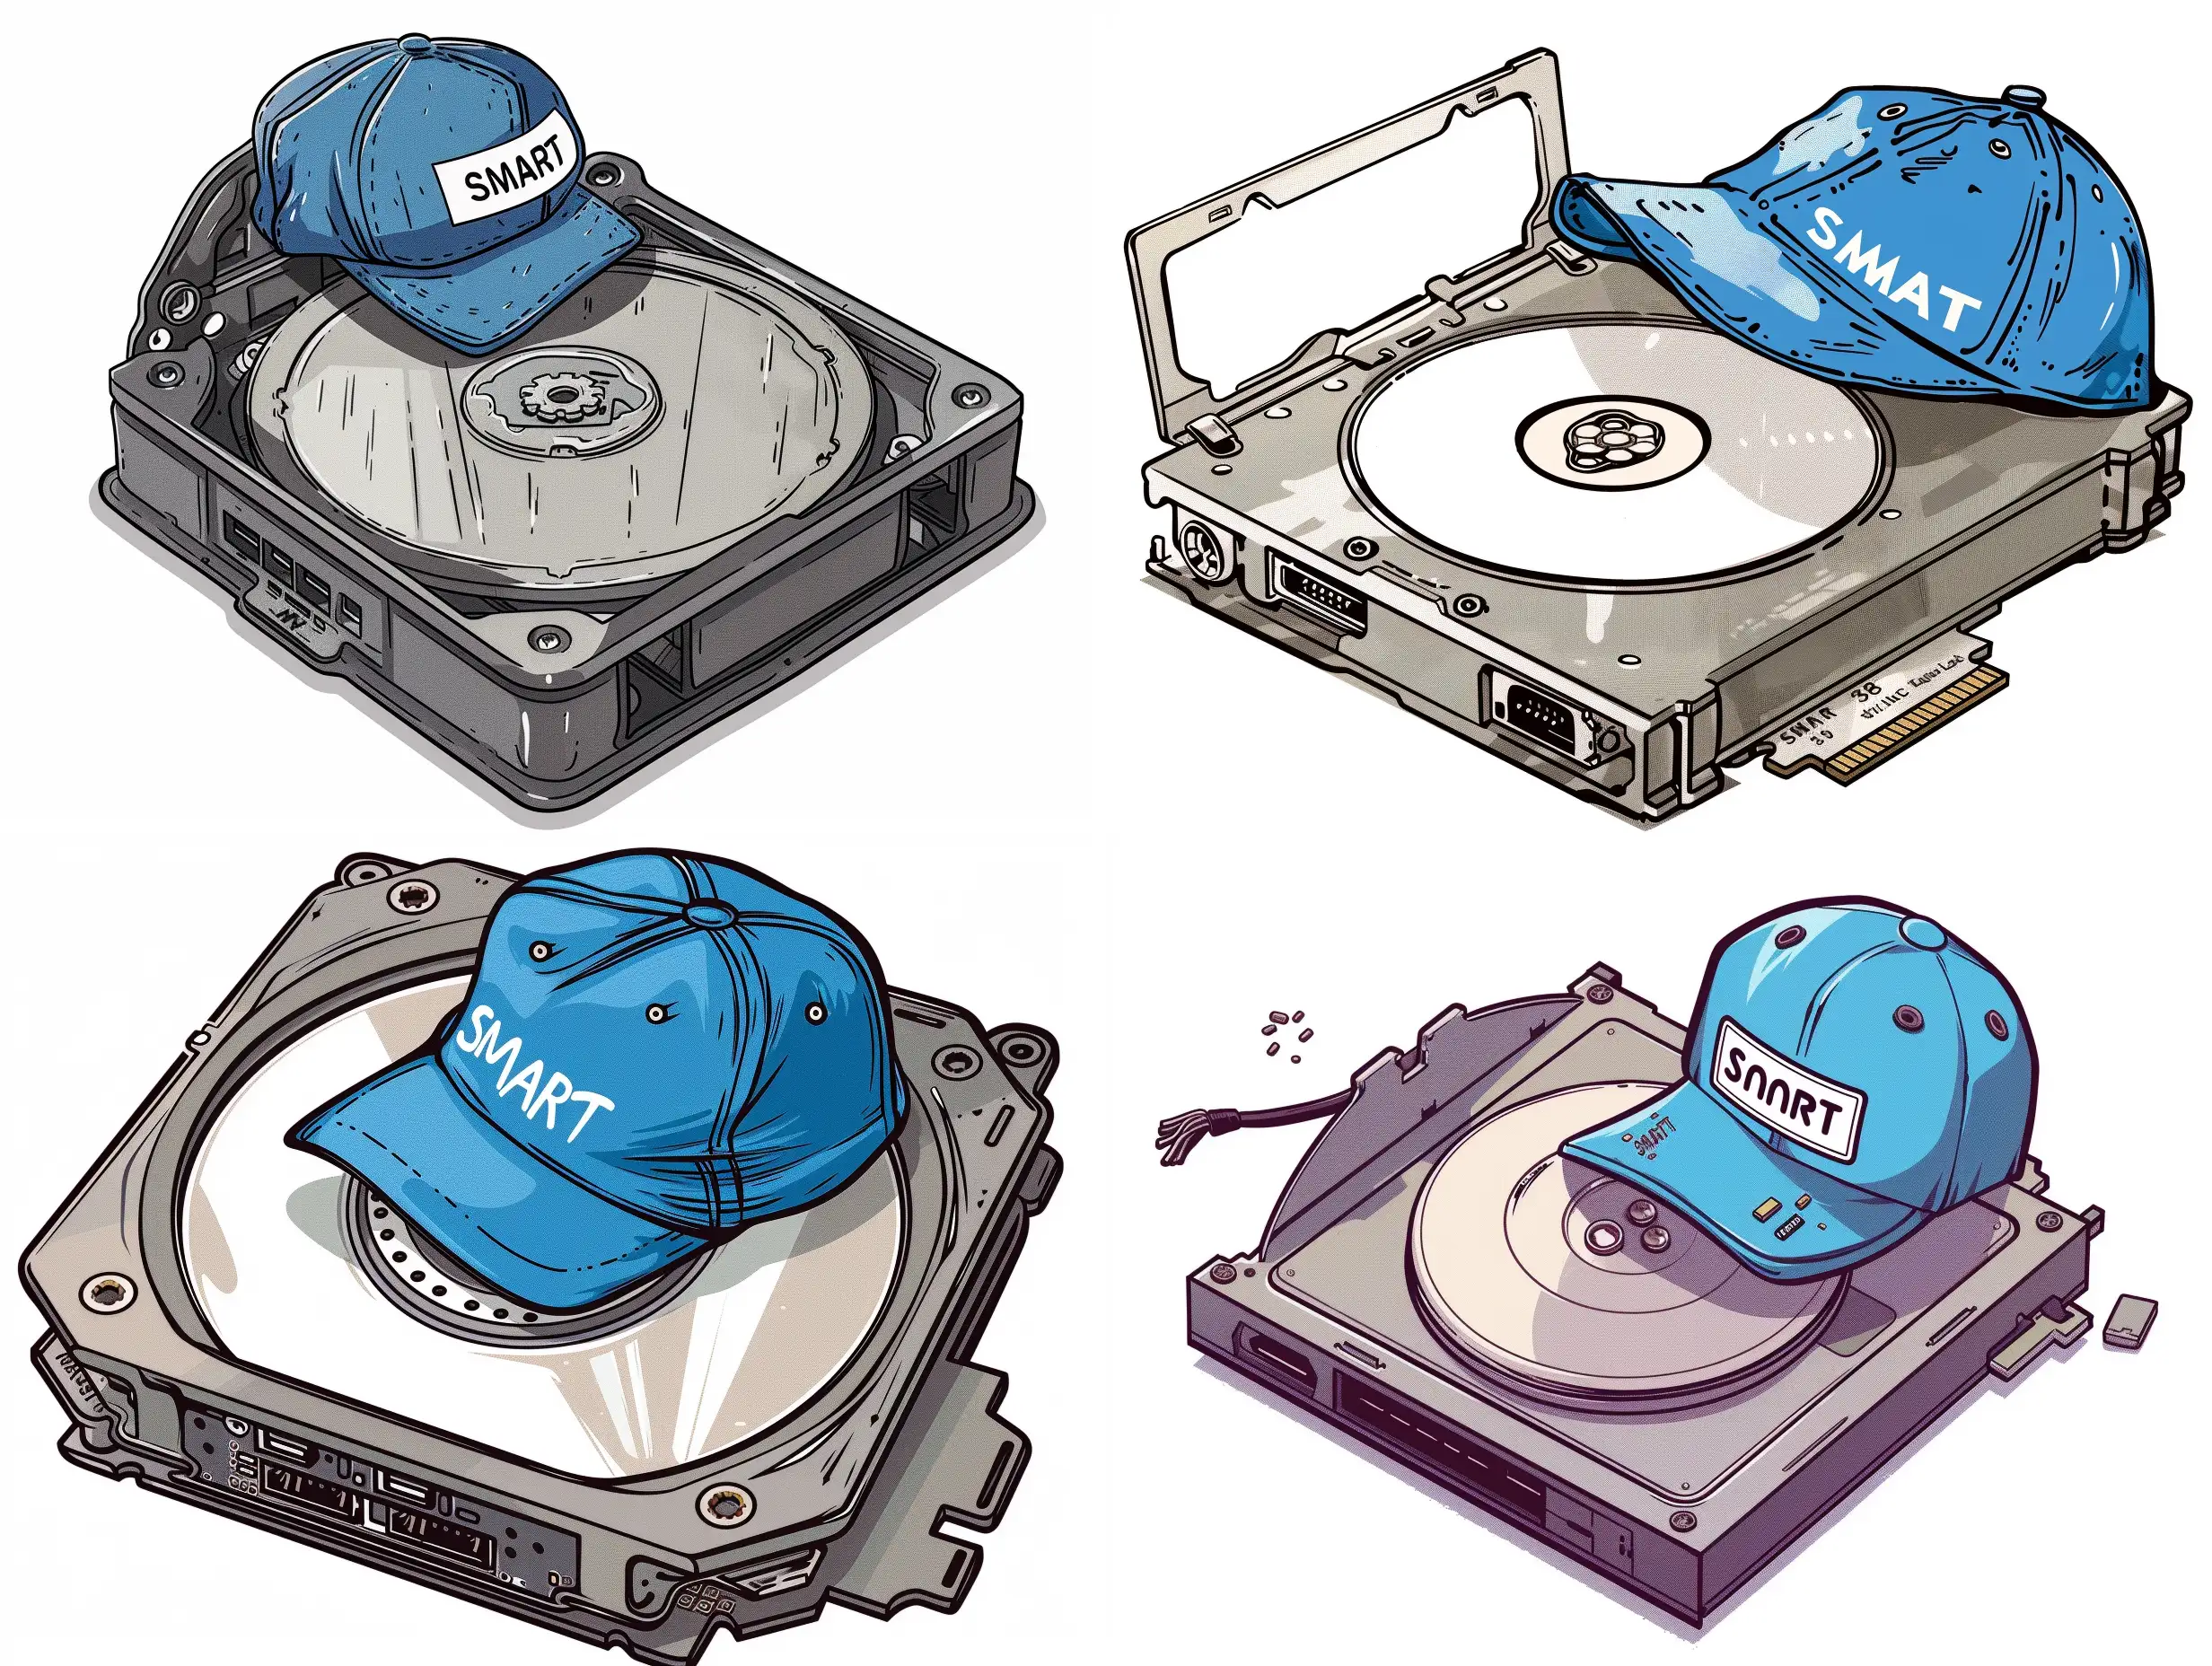 SMART. a 3.5" desktop computer hard drive with the cover removed, wearing a blue cap in pantone 288c, write "SMART" on the cap. Cartoon on a white background